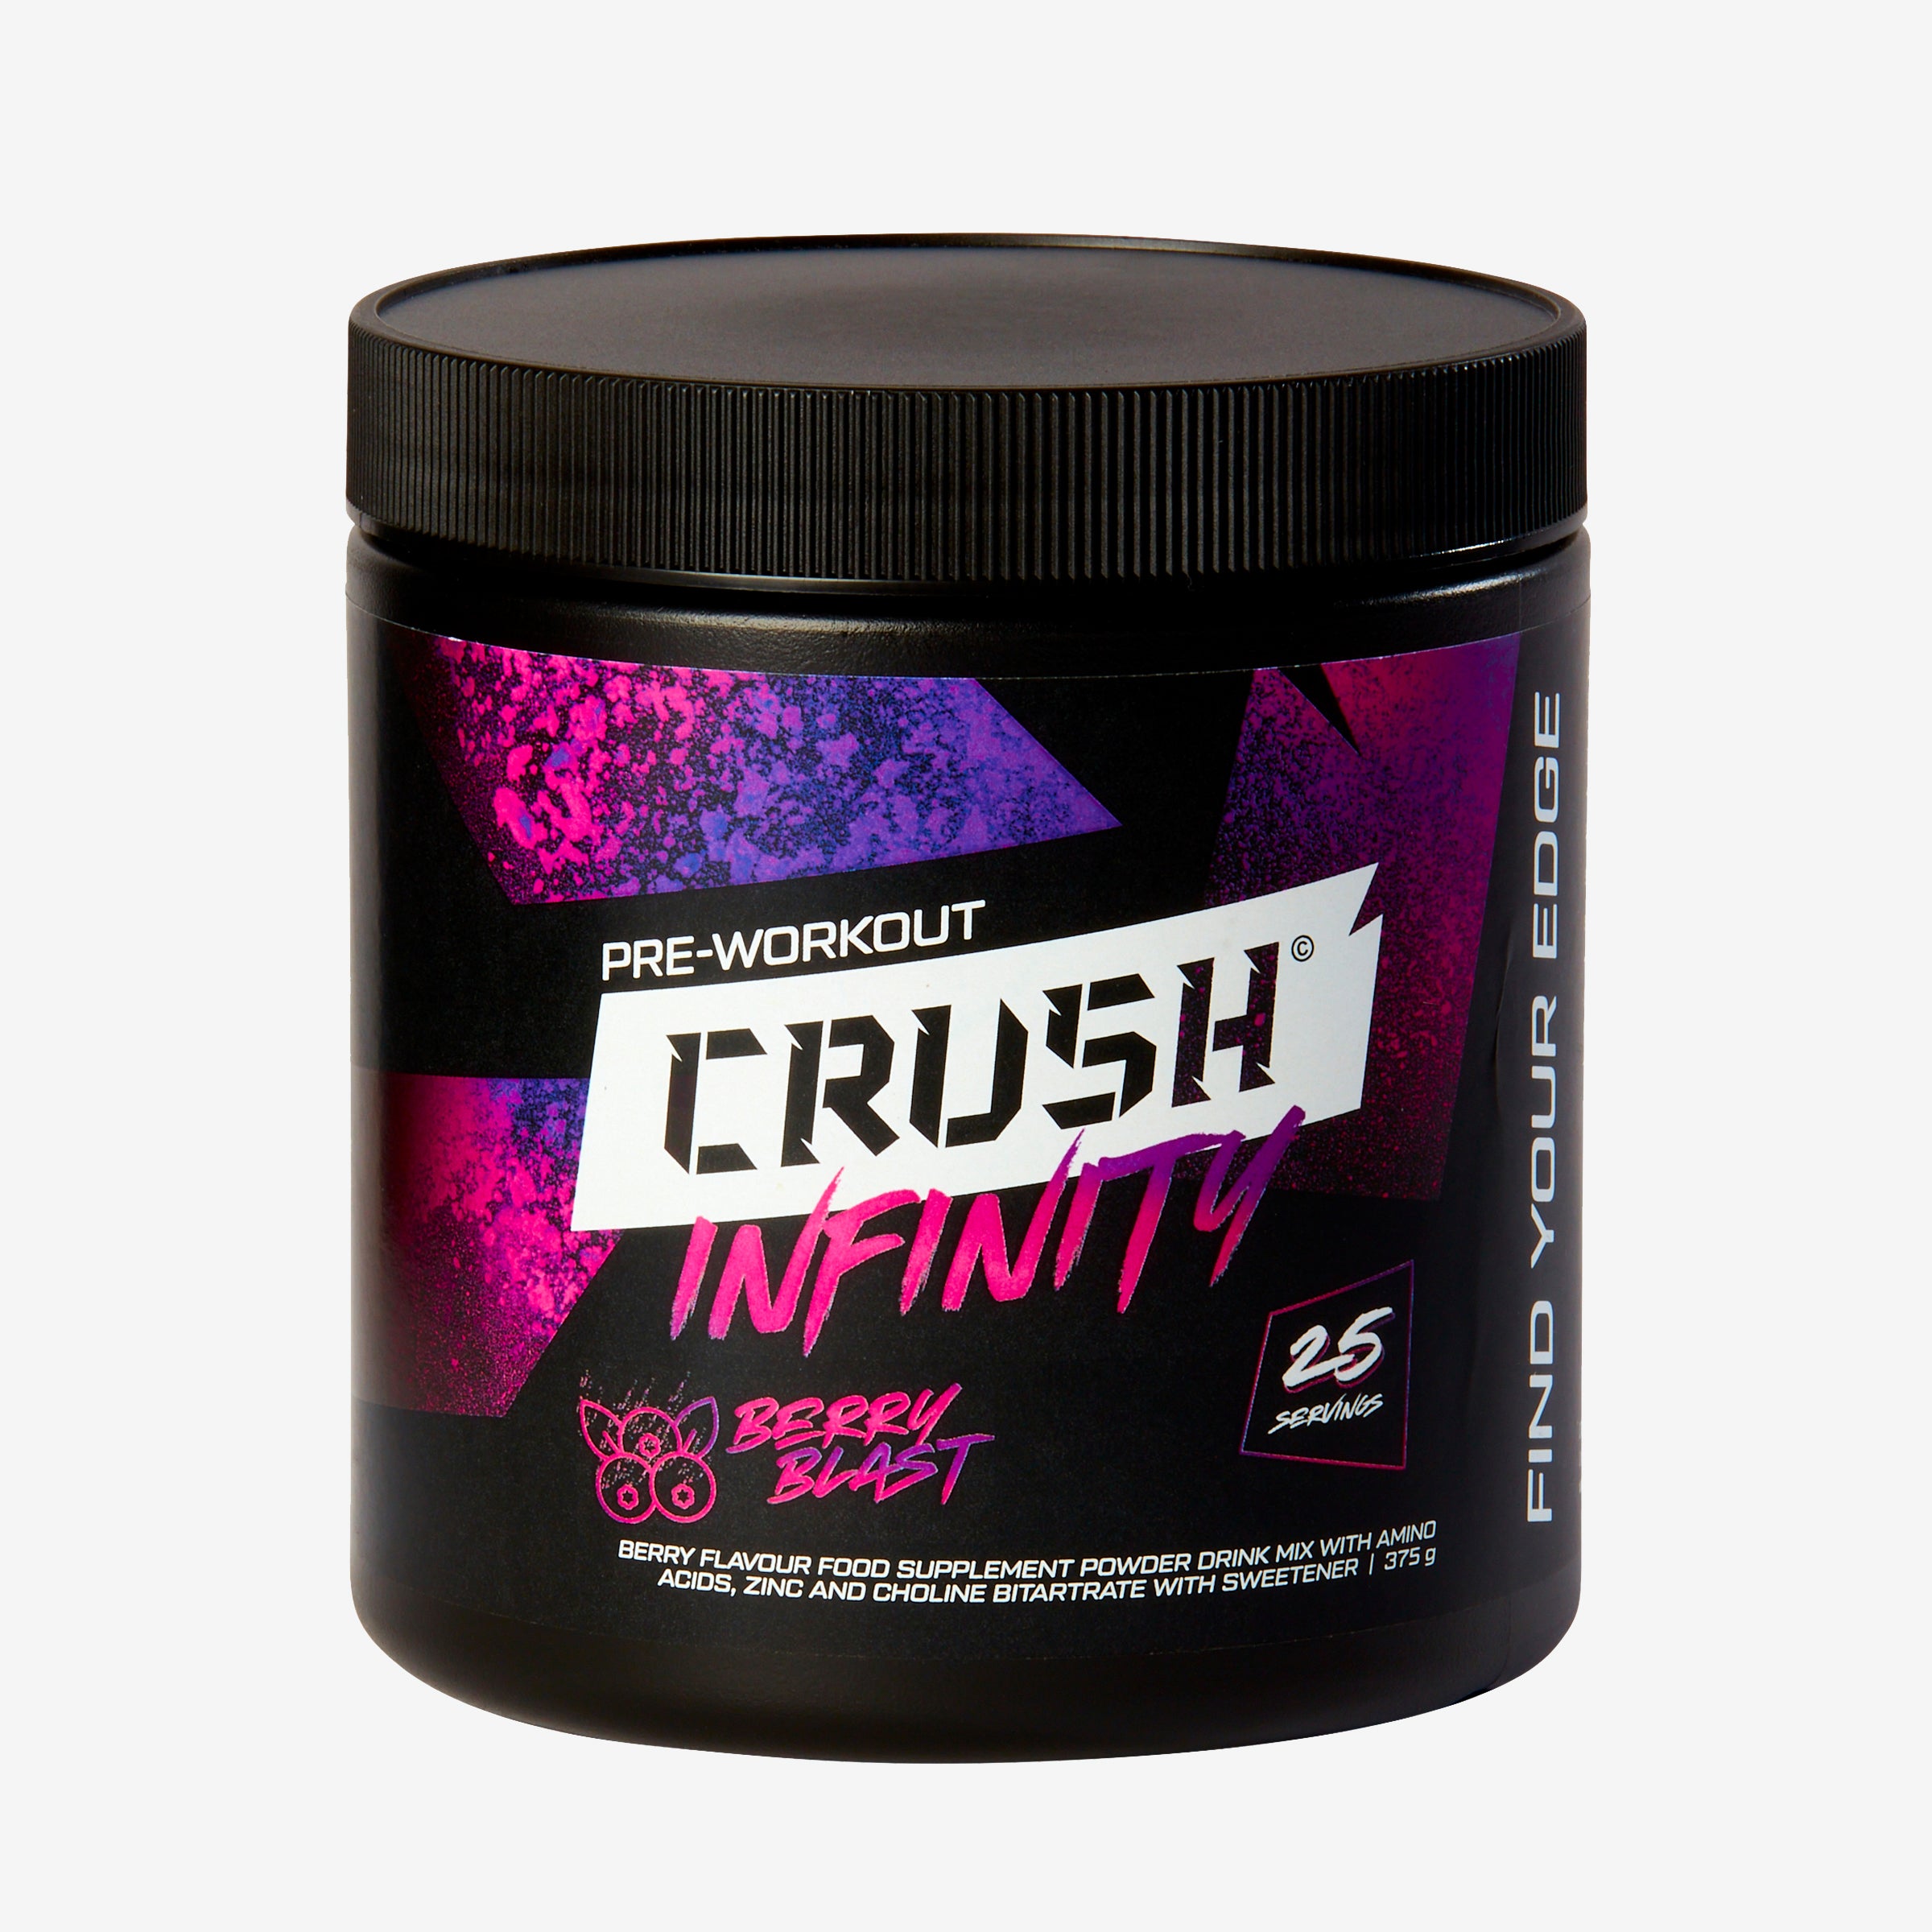 INFINITY Pre Workout